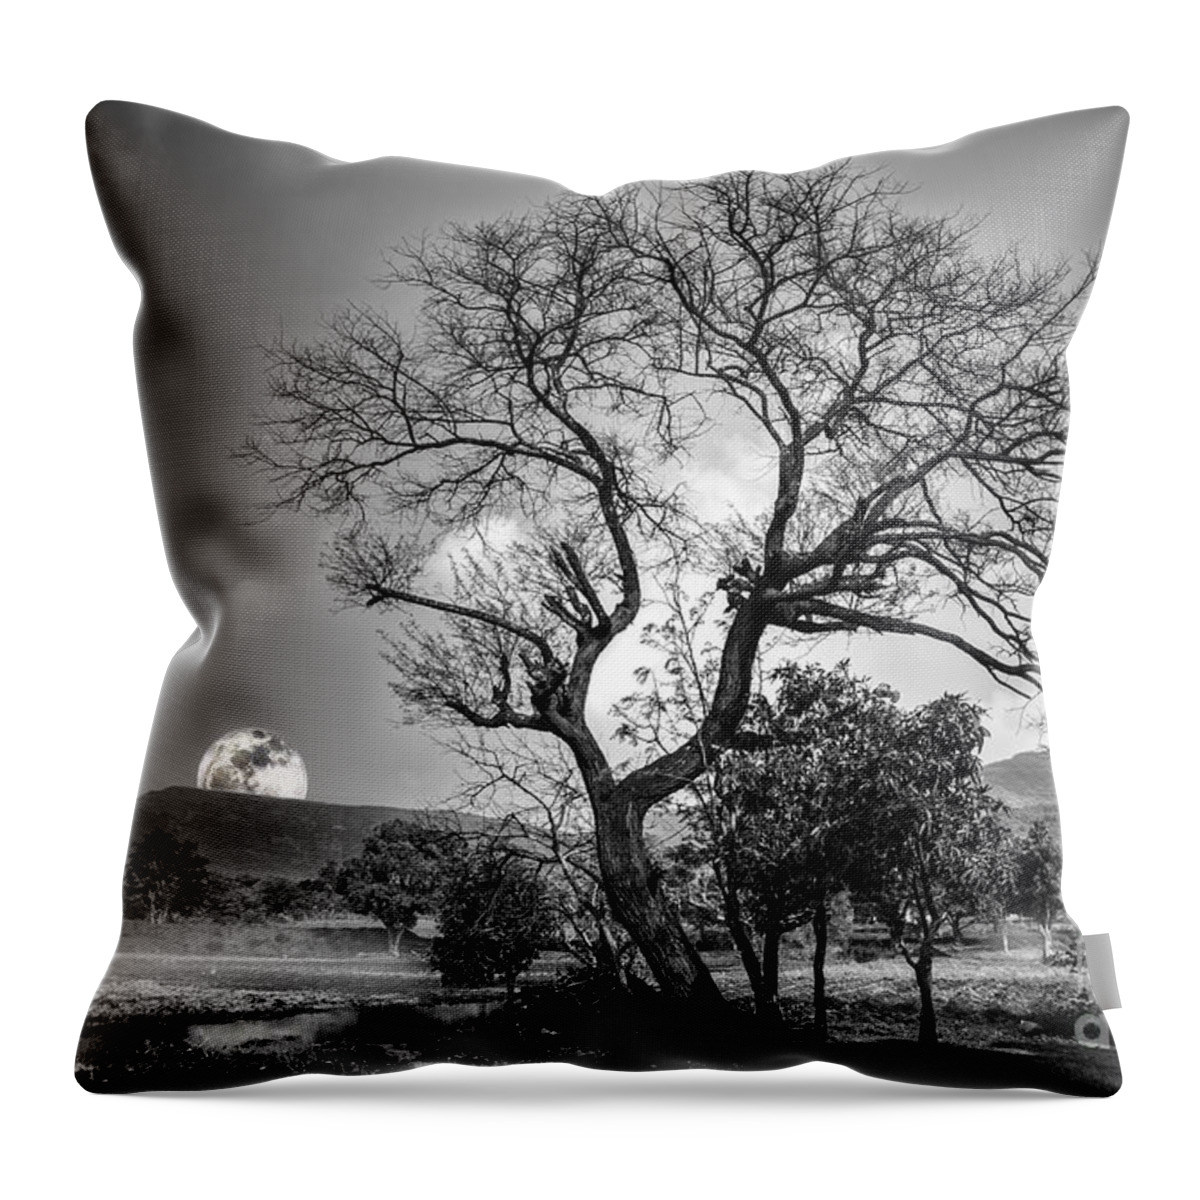 Trees Throw Pillow featuring the photograph Tree by Charuhas Images